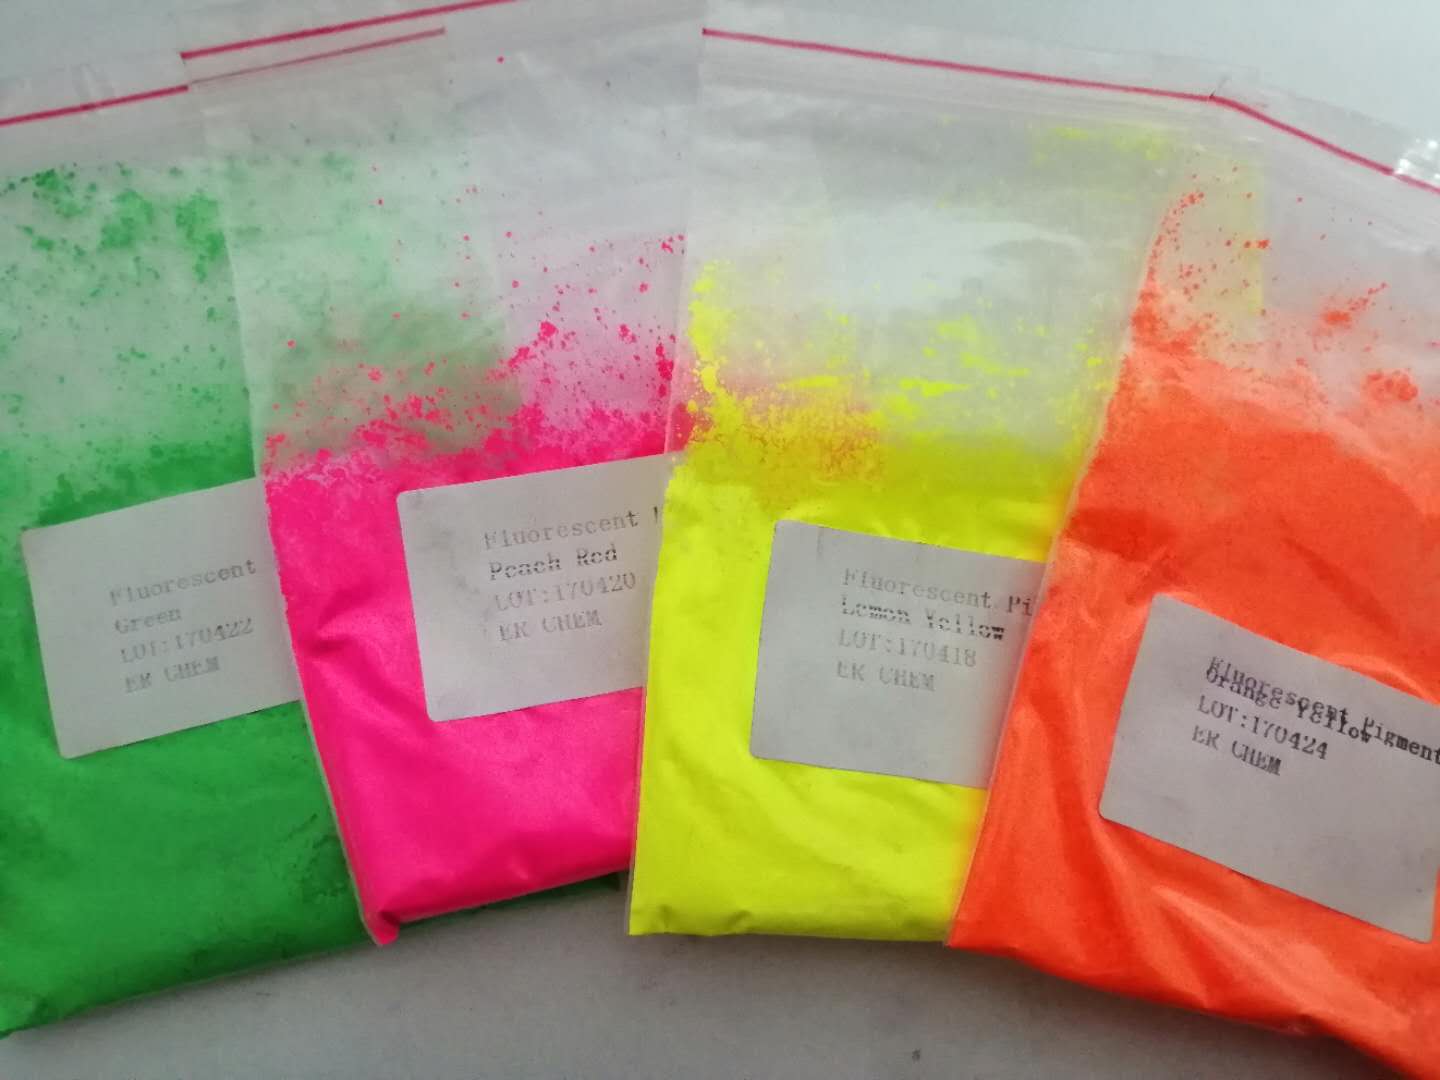 Fluorescent Pigment Powder Type Transparent Fluorescent Colorant for Solvent Based Printing Inks 